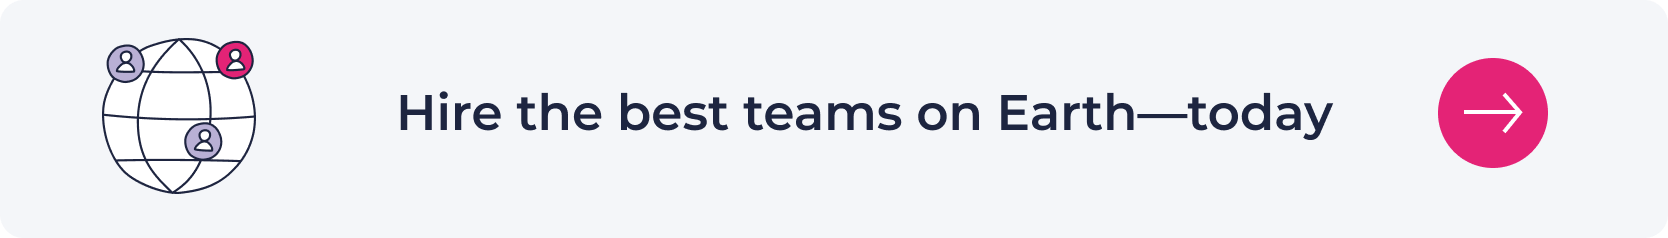 Hire the best teams on Earth - today